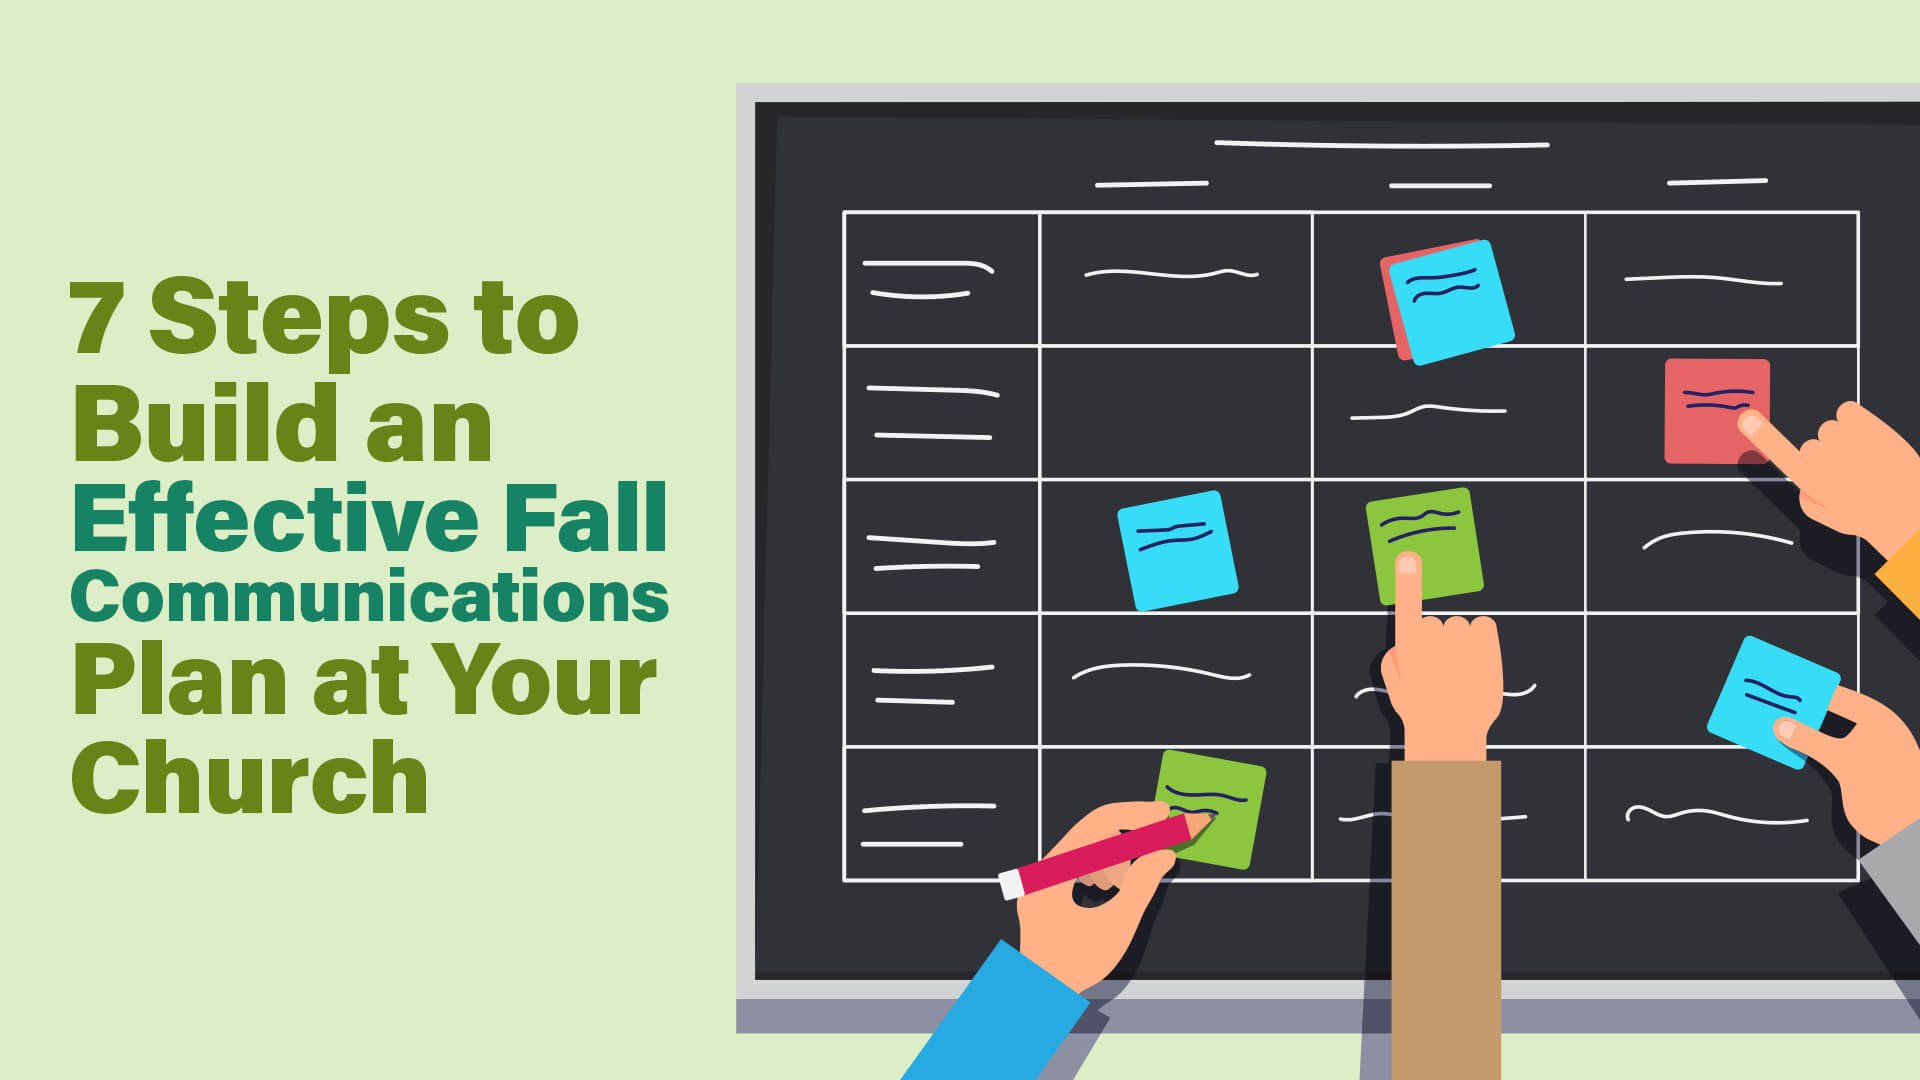 7 Steps to Build an Effective Fall Communications Plan at Your Church